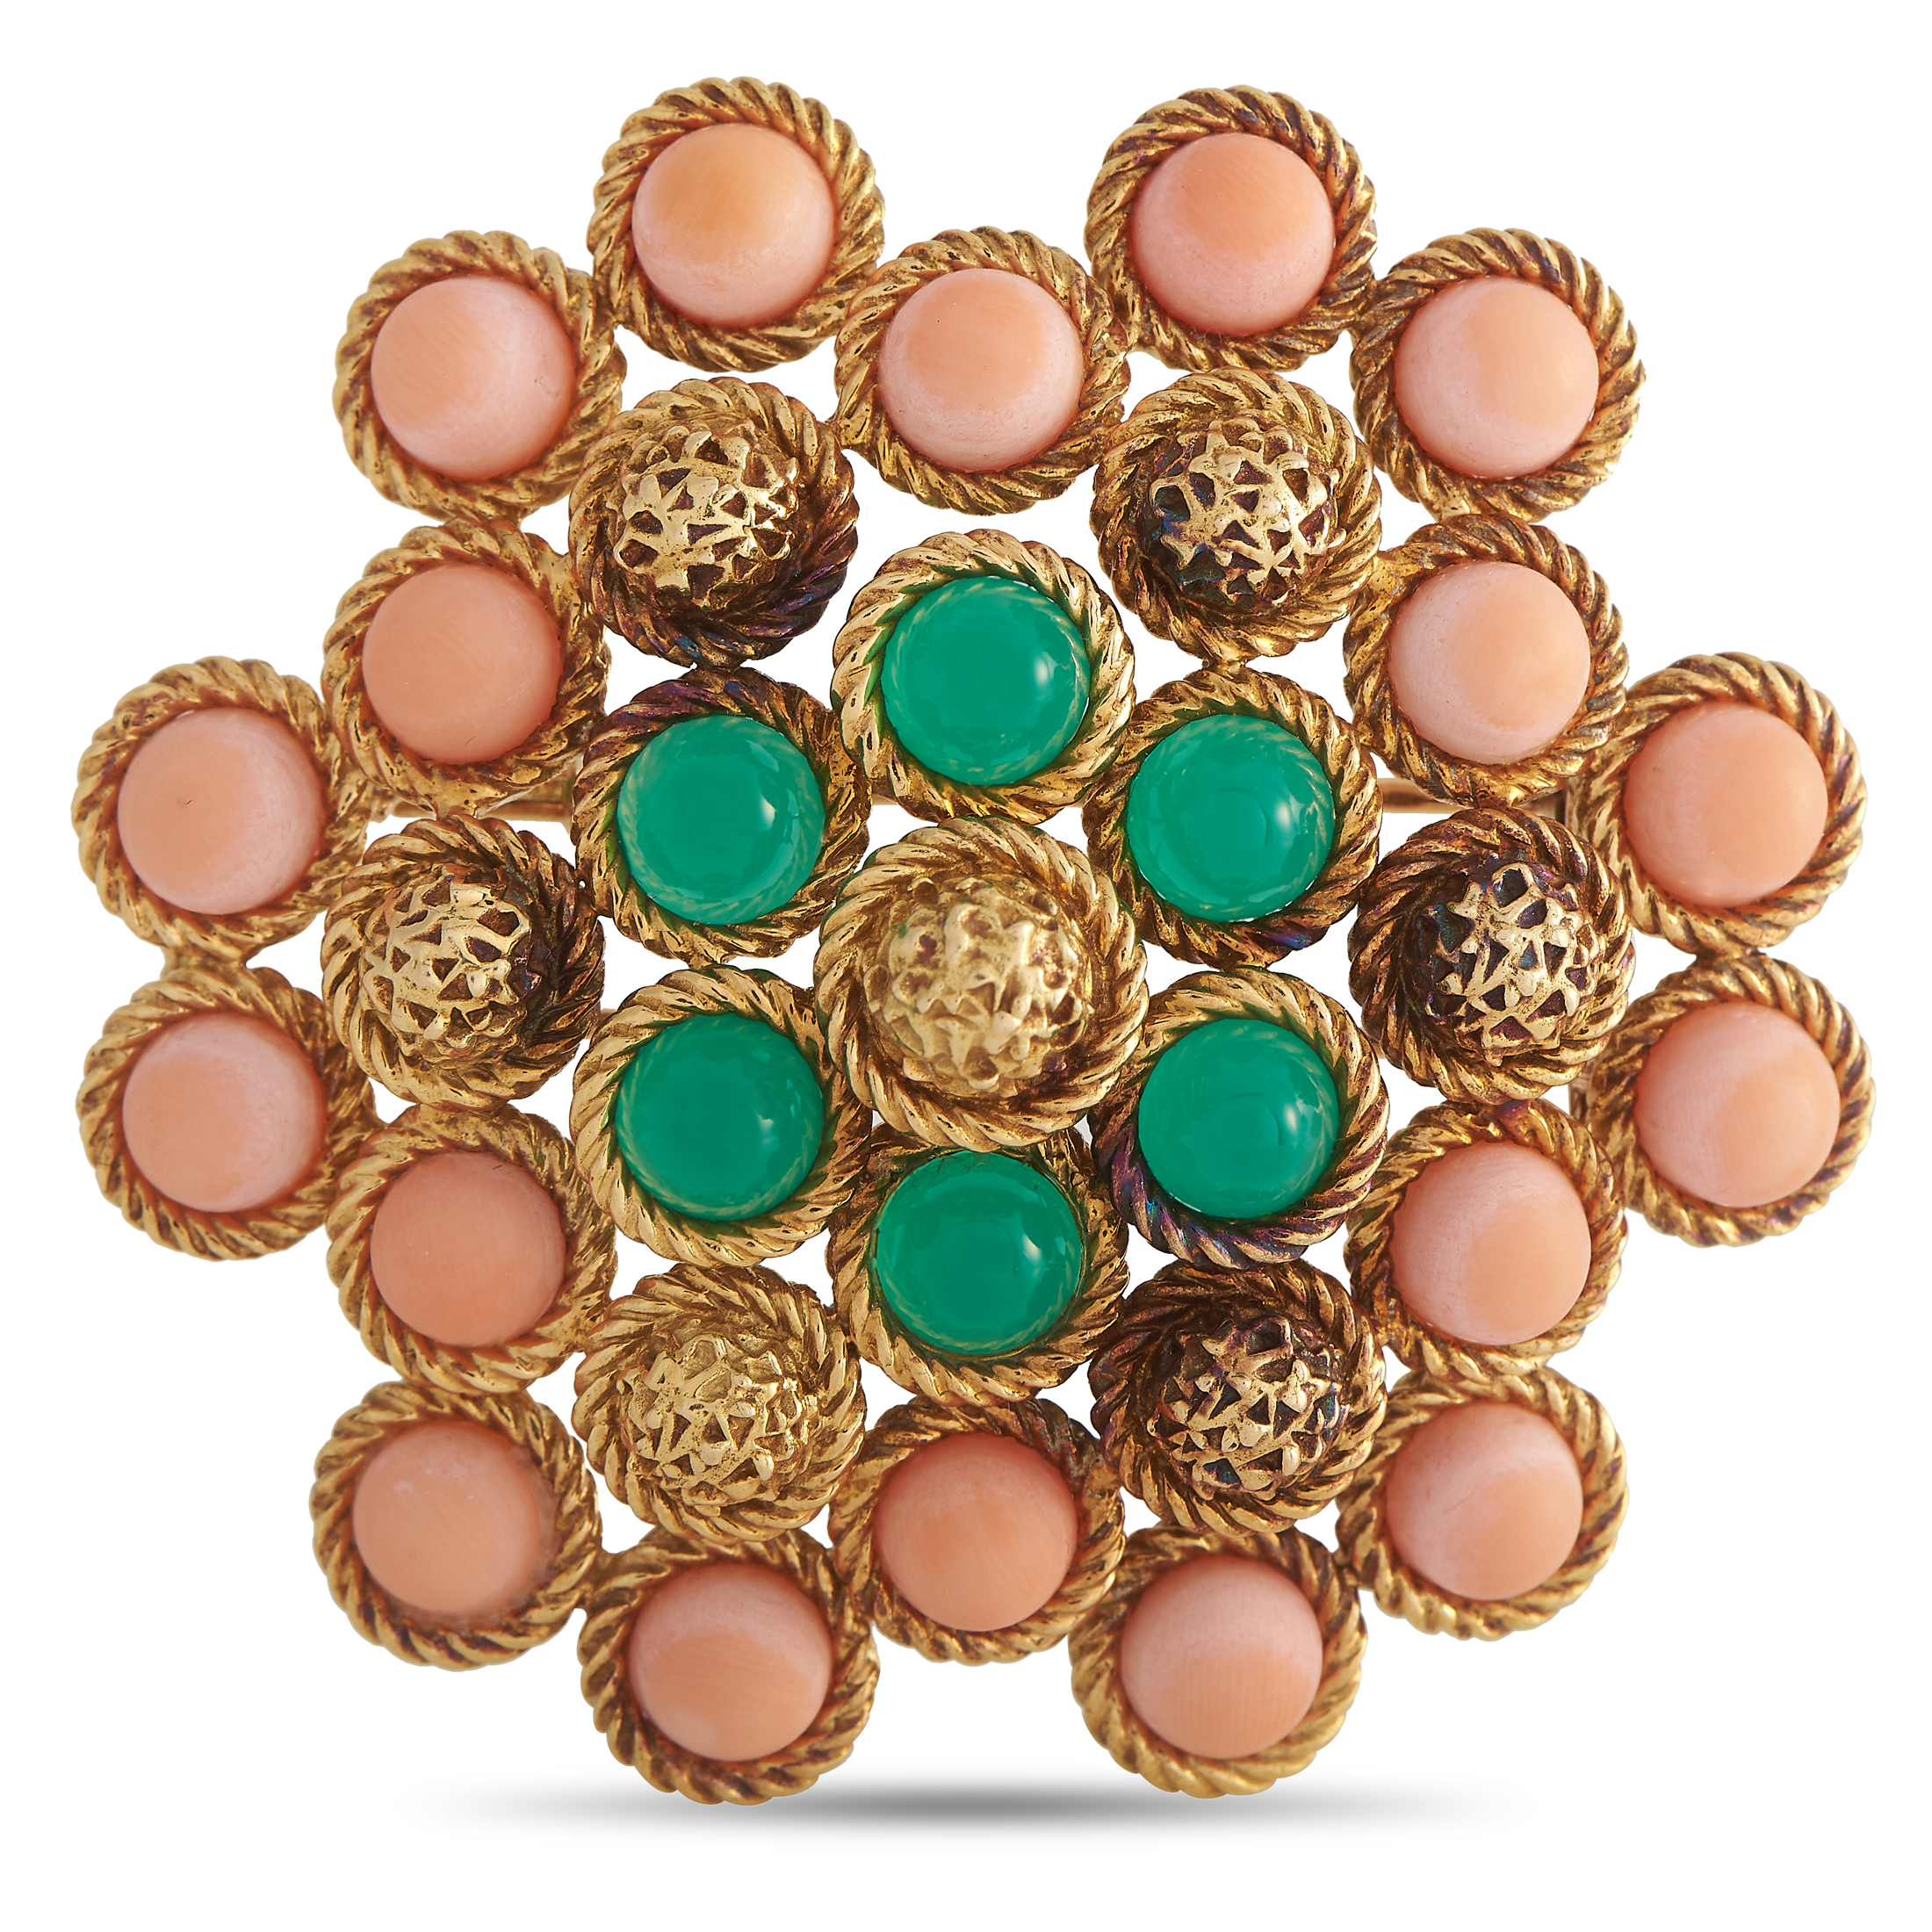 Van Cleef & Arpels 18K Yellow Gold Coral and Chrysoprase Brooch VC01-081022